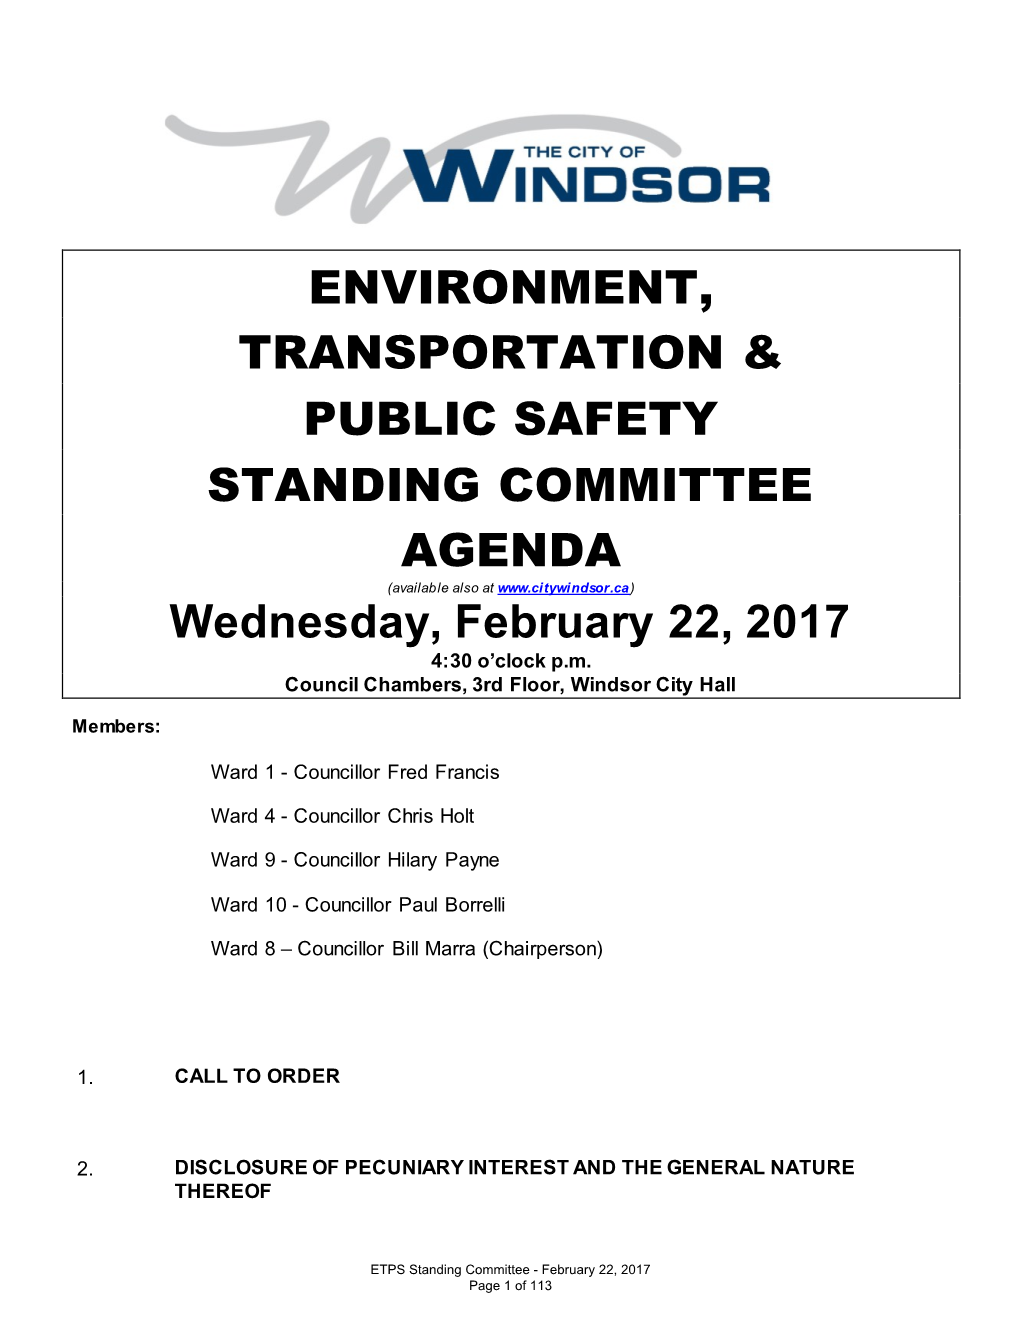 Meeting Documents Environment, Transportation & Public Safety